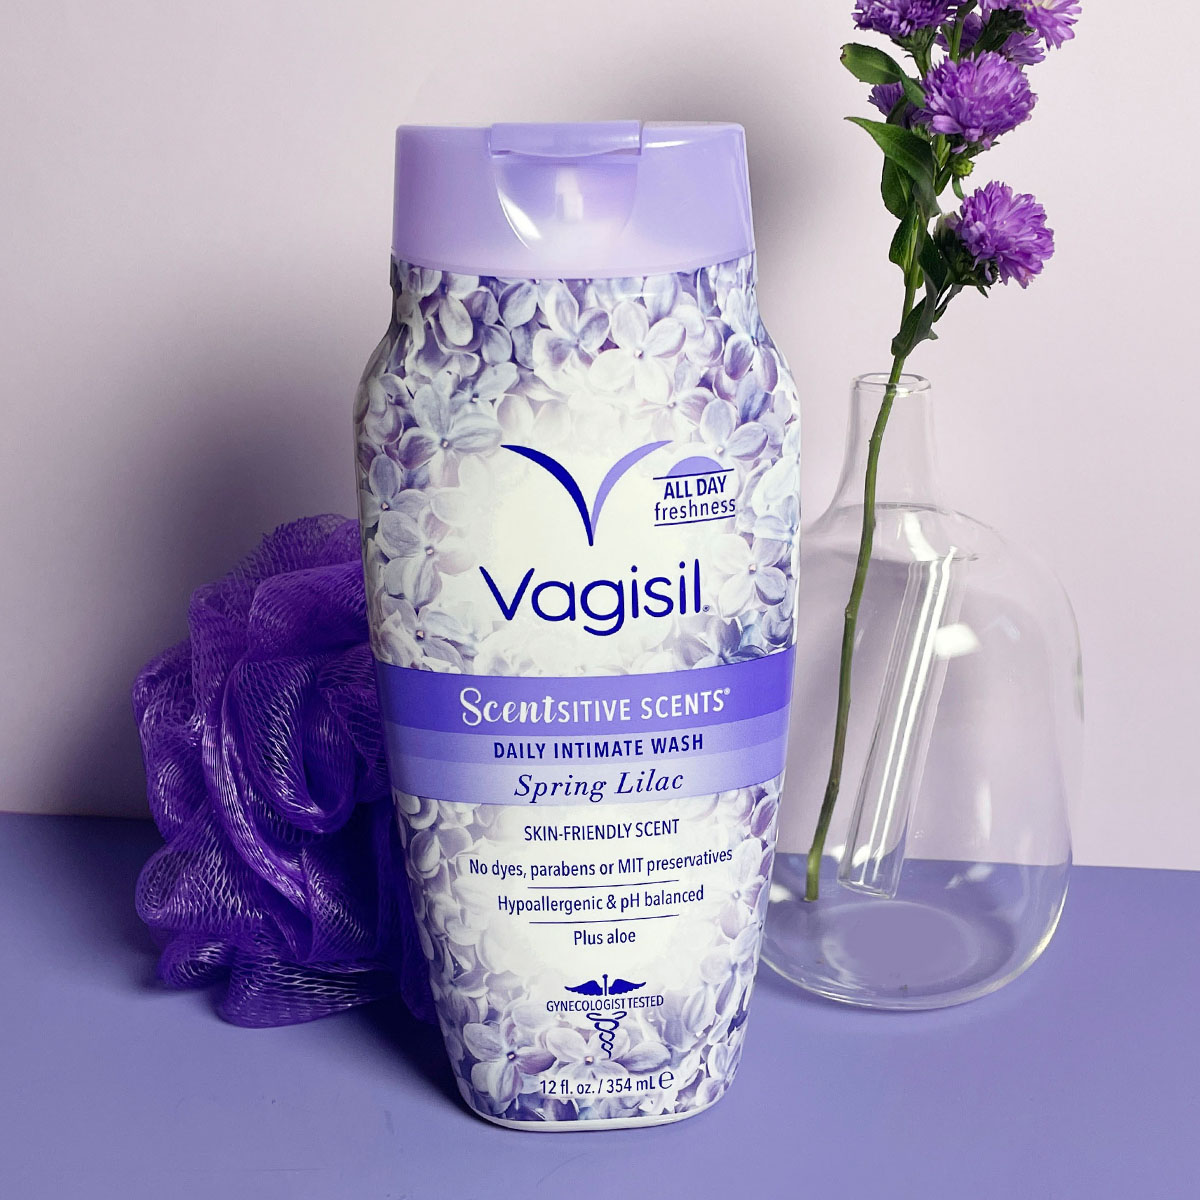 Vagisil Scentsitive Scents Daily Intimate Feminine Wash for Women, Gynecologist Tested, Spring Lilac, Fresh and Gentle on Skin, 12 Fluid Ounce, Pack of 1 12 Fl Oz (Pack of 1) Spring Lilac